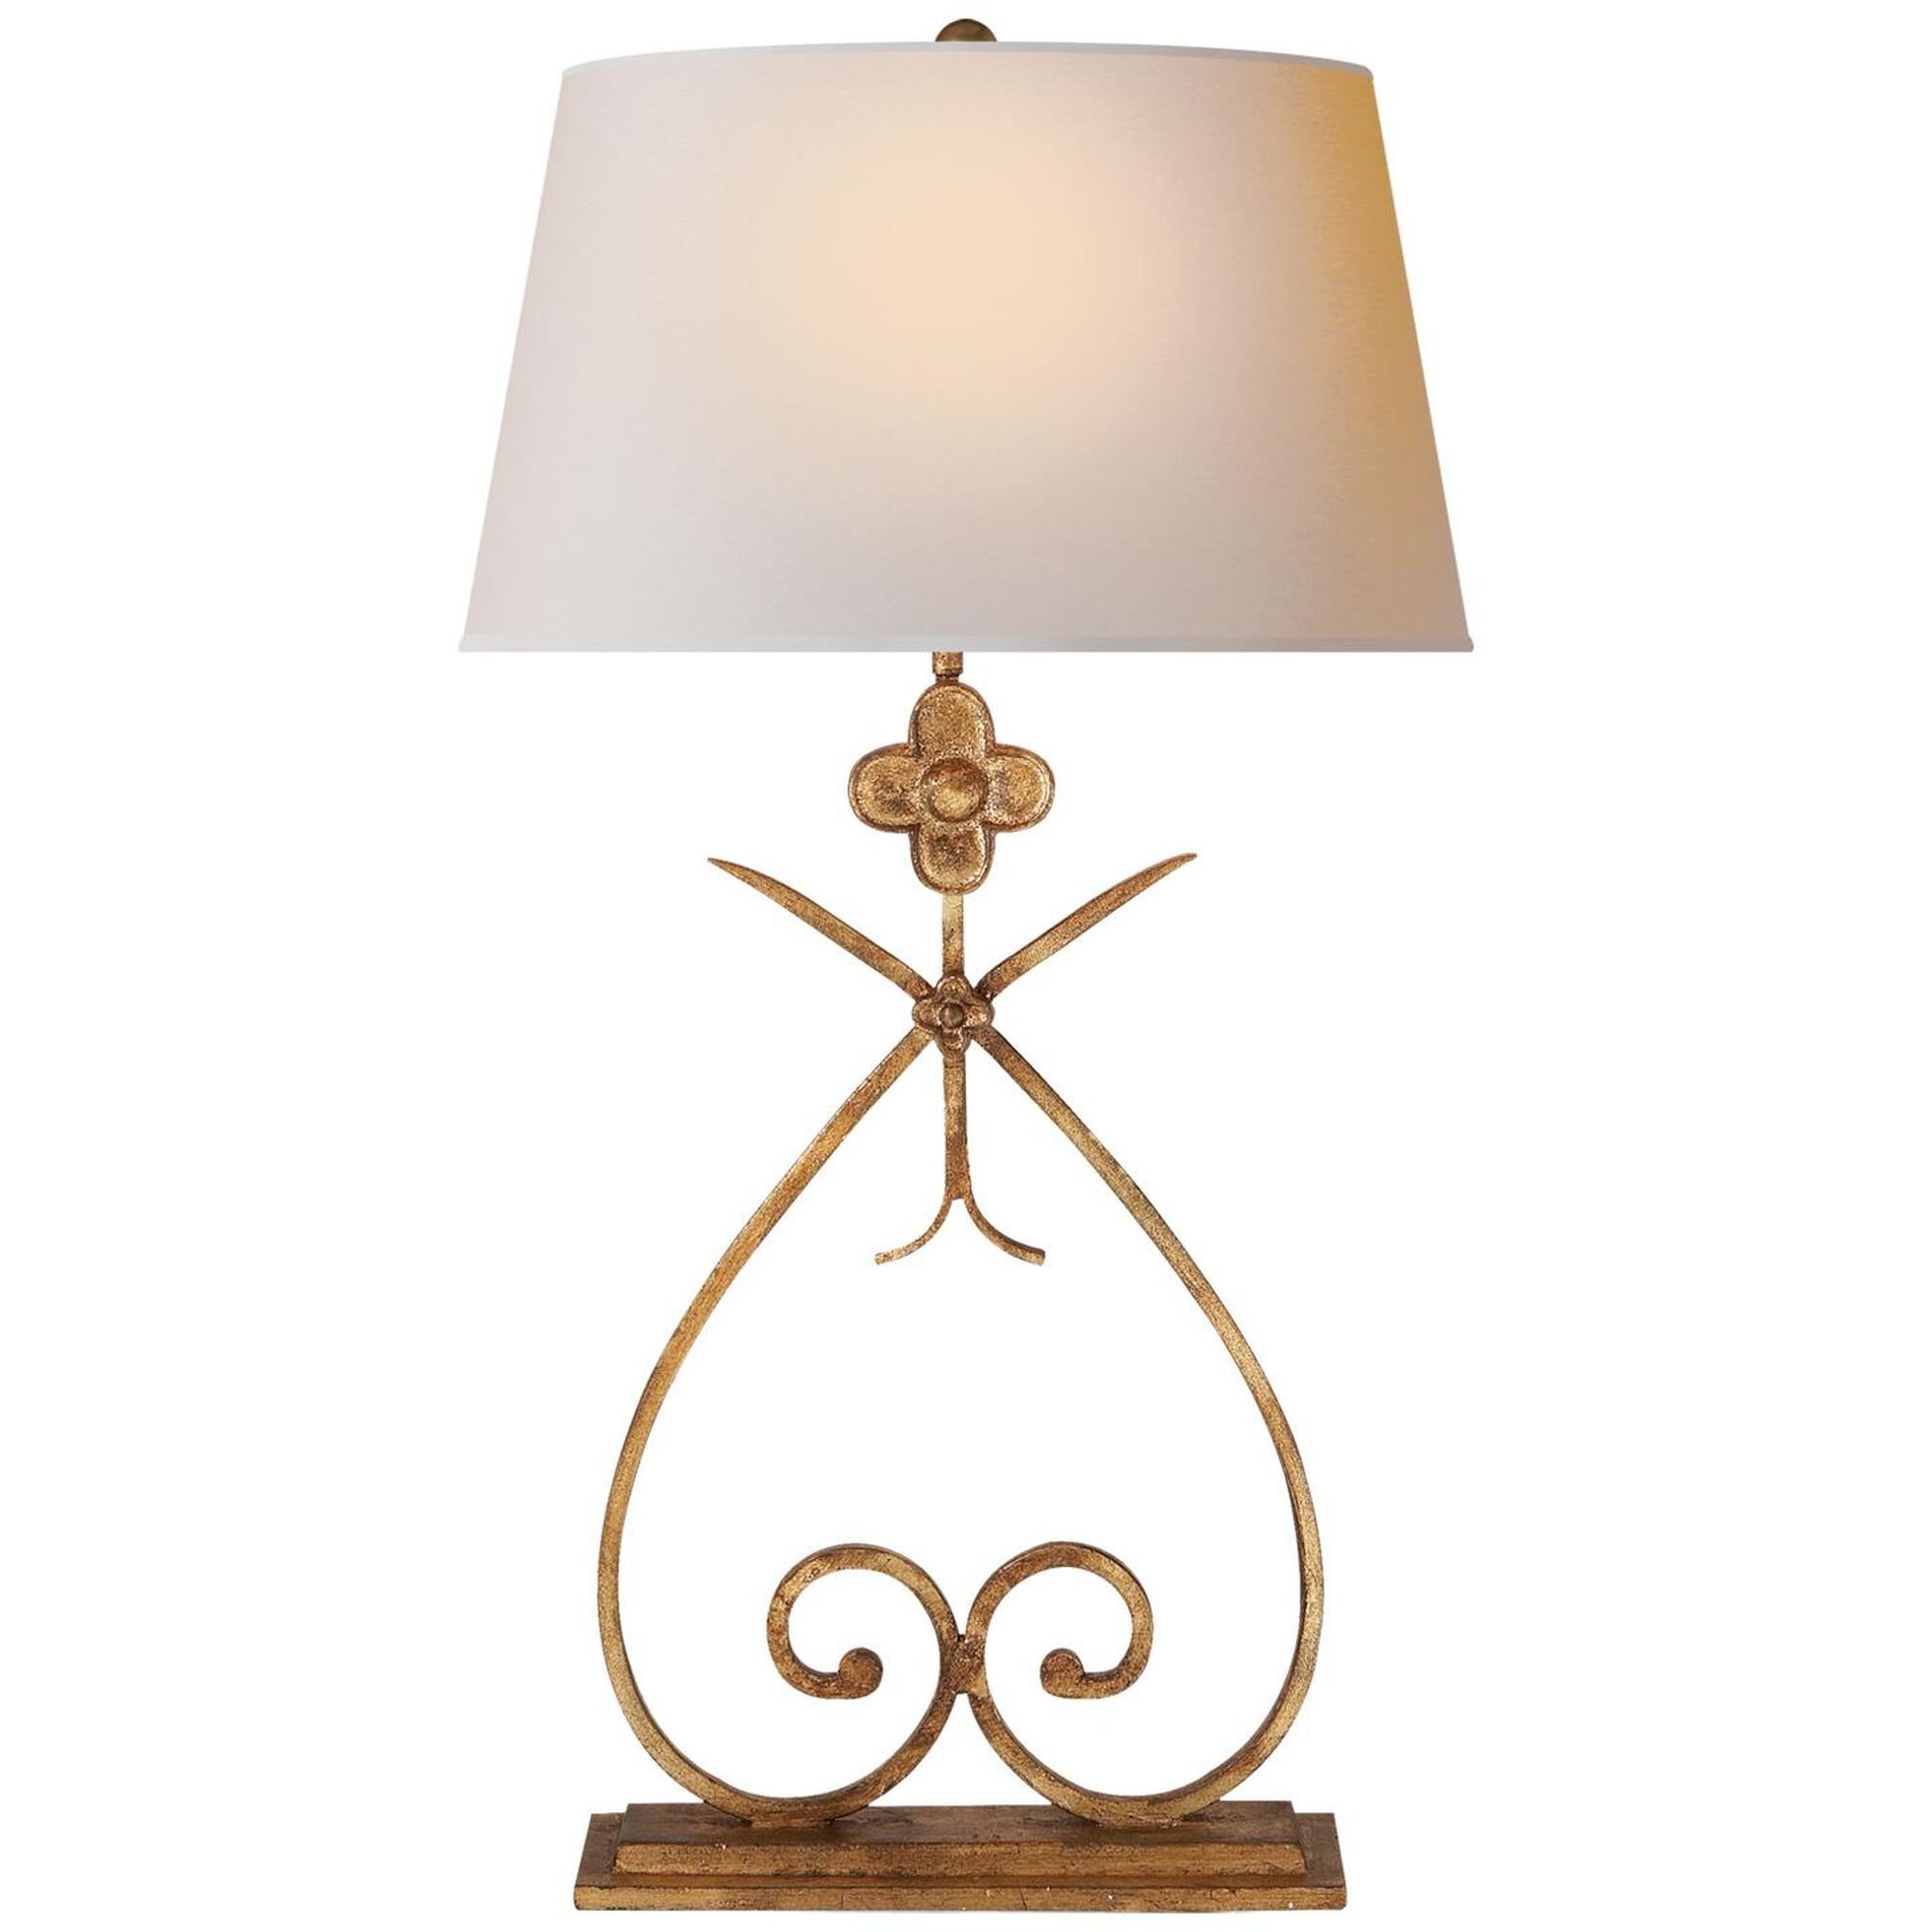 Suzanne Kasler Harper 29 Inch Table Lamp by Visual Comfort and Co. | Capitol Lighting 1800lighting.com